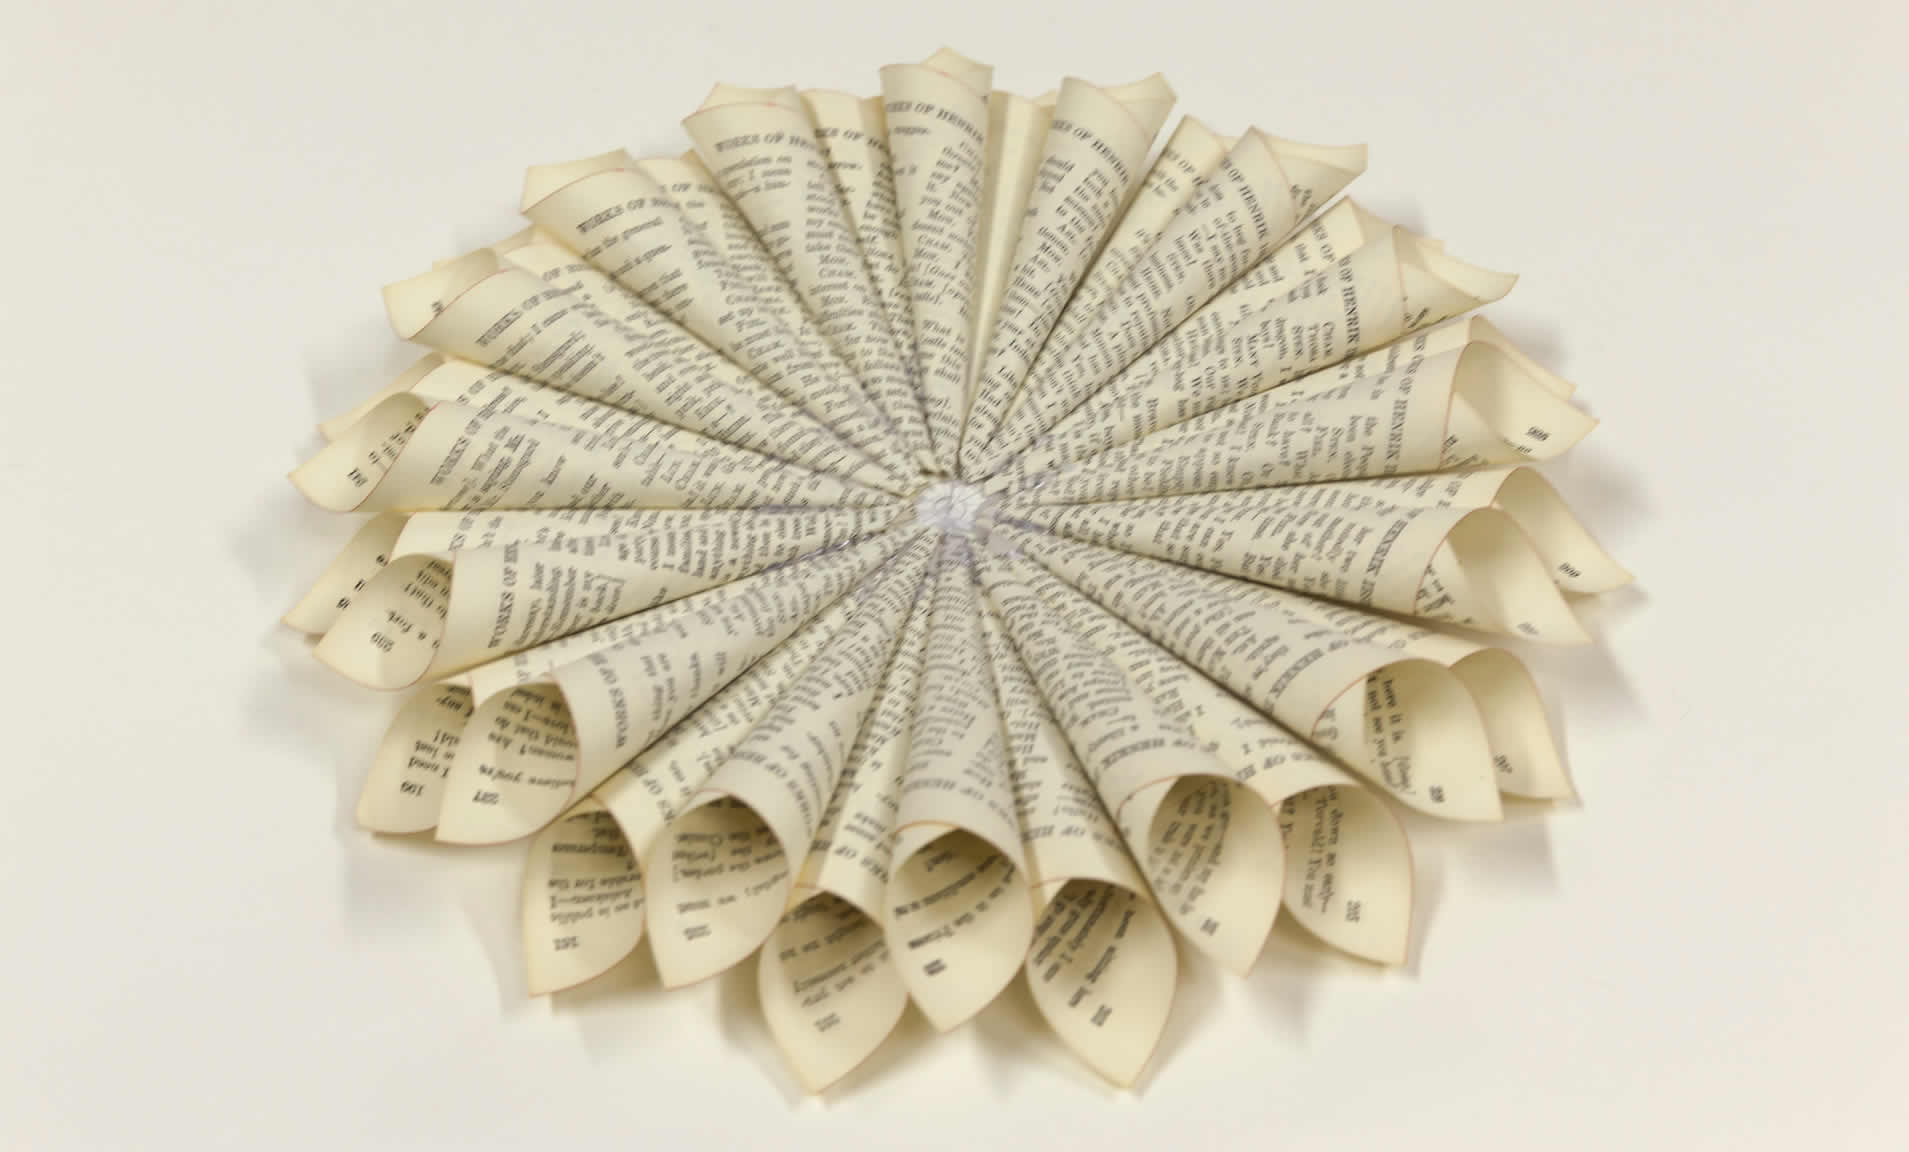 Repurpose an old book into a book page wreath